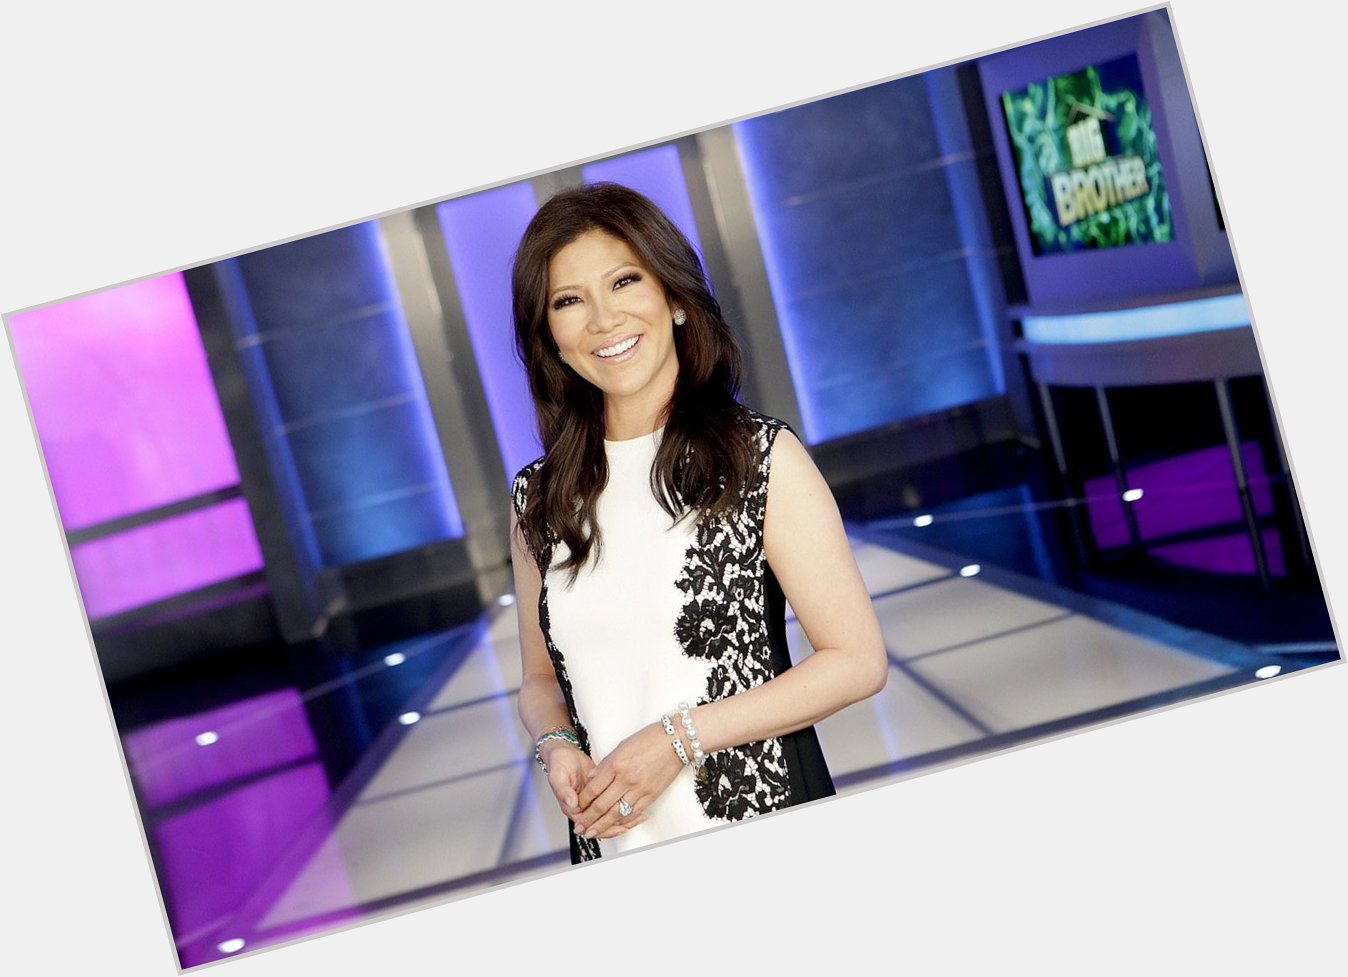 Happy Birthday to presenter, anchor and producer Julie Chen born on January 6, 1970 